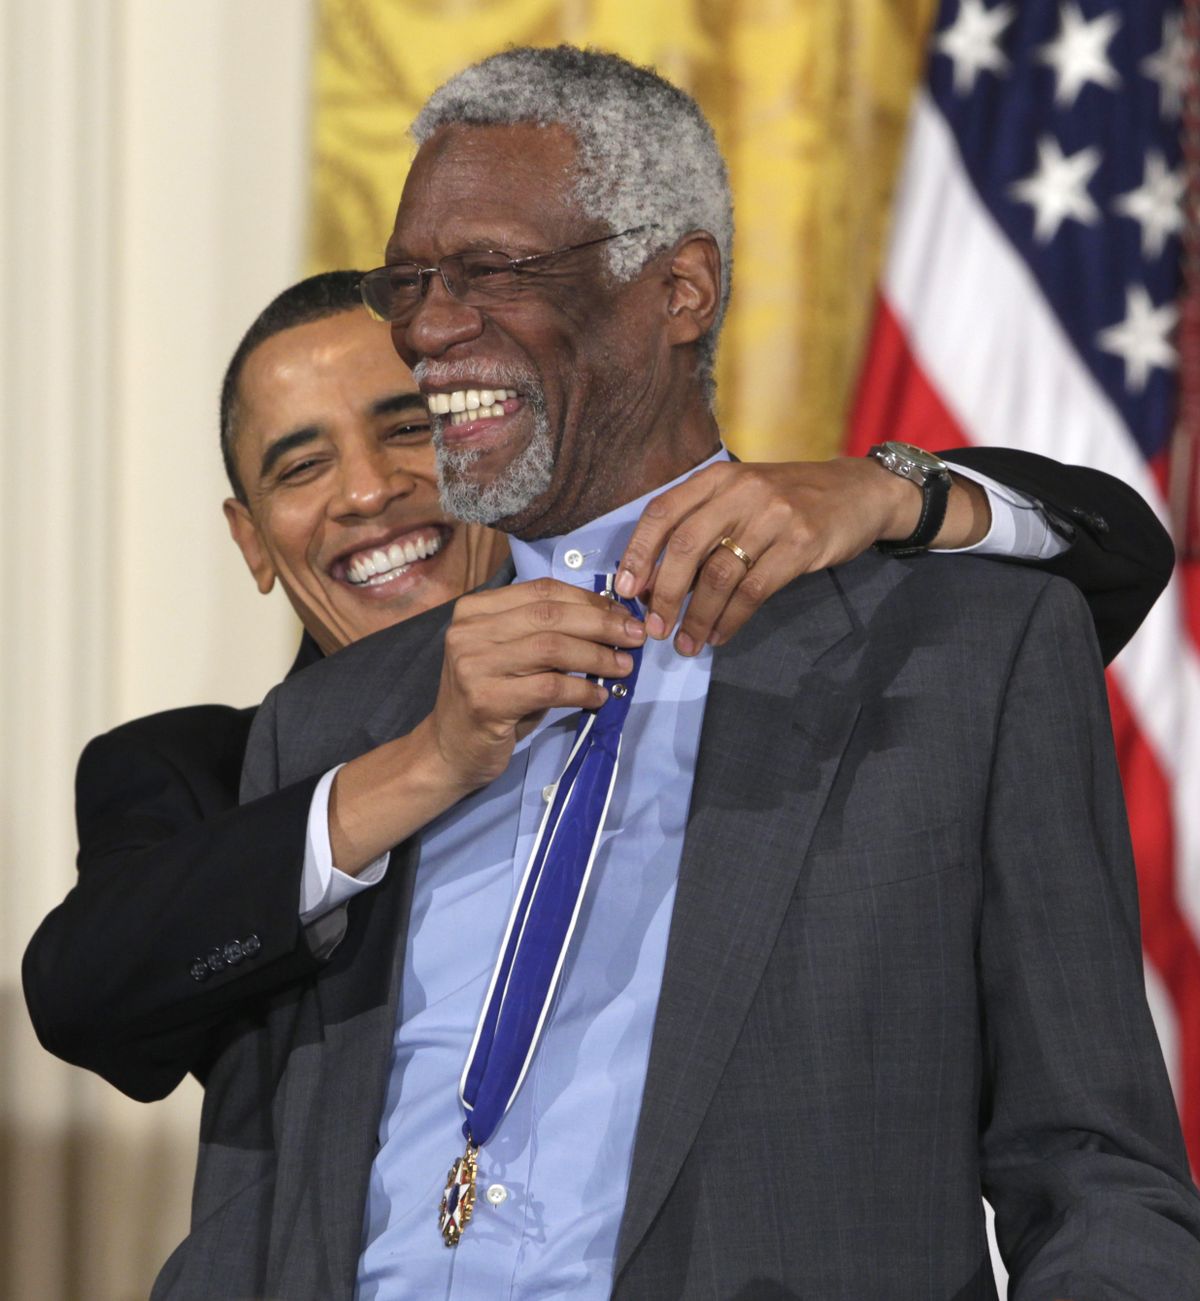 President Barack Obama reaches up to present a 2010 Presidential Medal of Freedom to basketball hall of fame member and former Boston Celtics coach and captain Bill Russell, Tuesday, Feb. 15, 2011, during a ceremony in the East Room of the White House in Washington. (Carolyn Kaster / Associated Press)